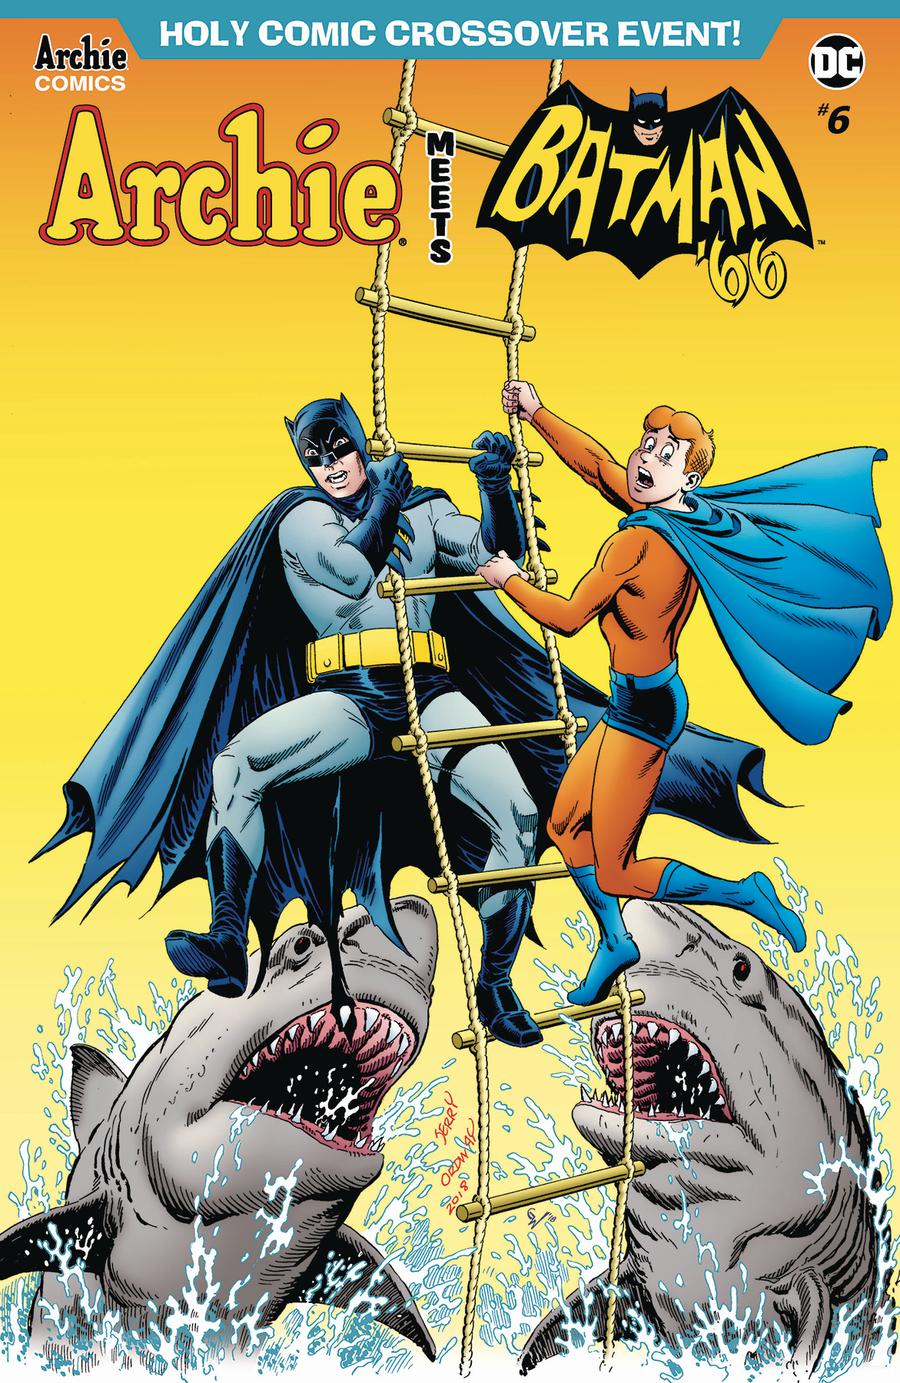 Archie Meets Batman 66 #6 Cover C Variant Jerry Ordway & Glenn Whitmore Cover